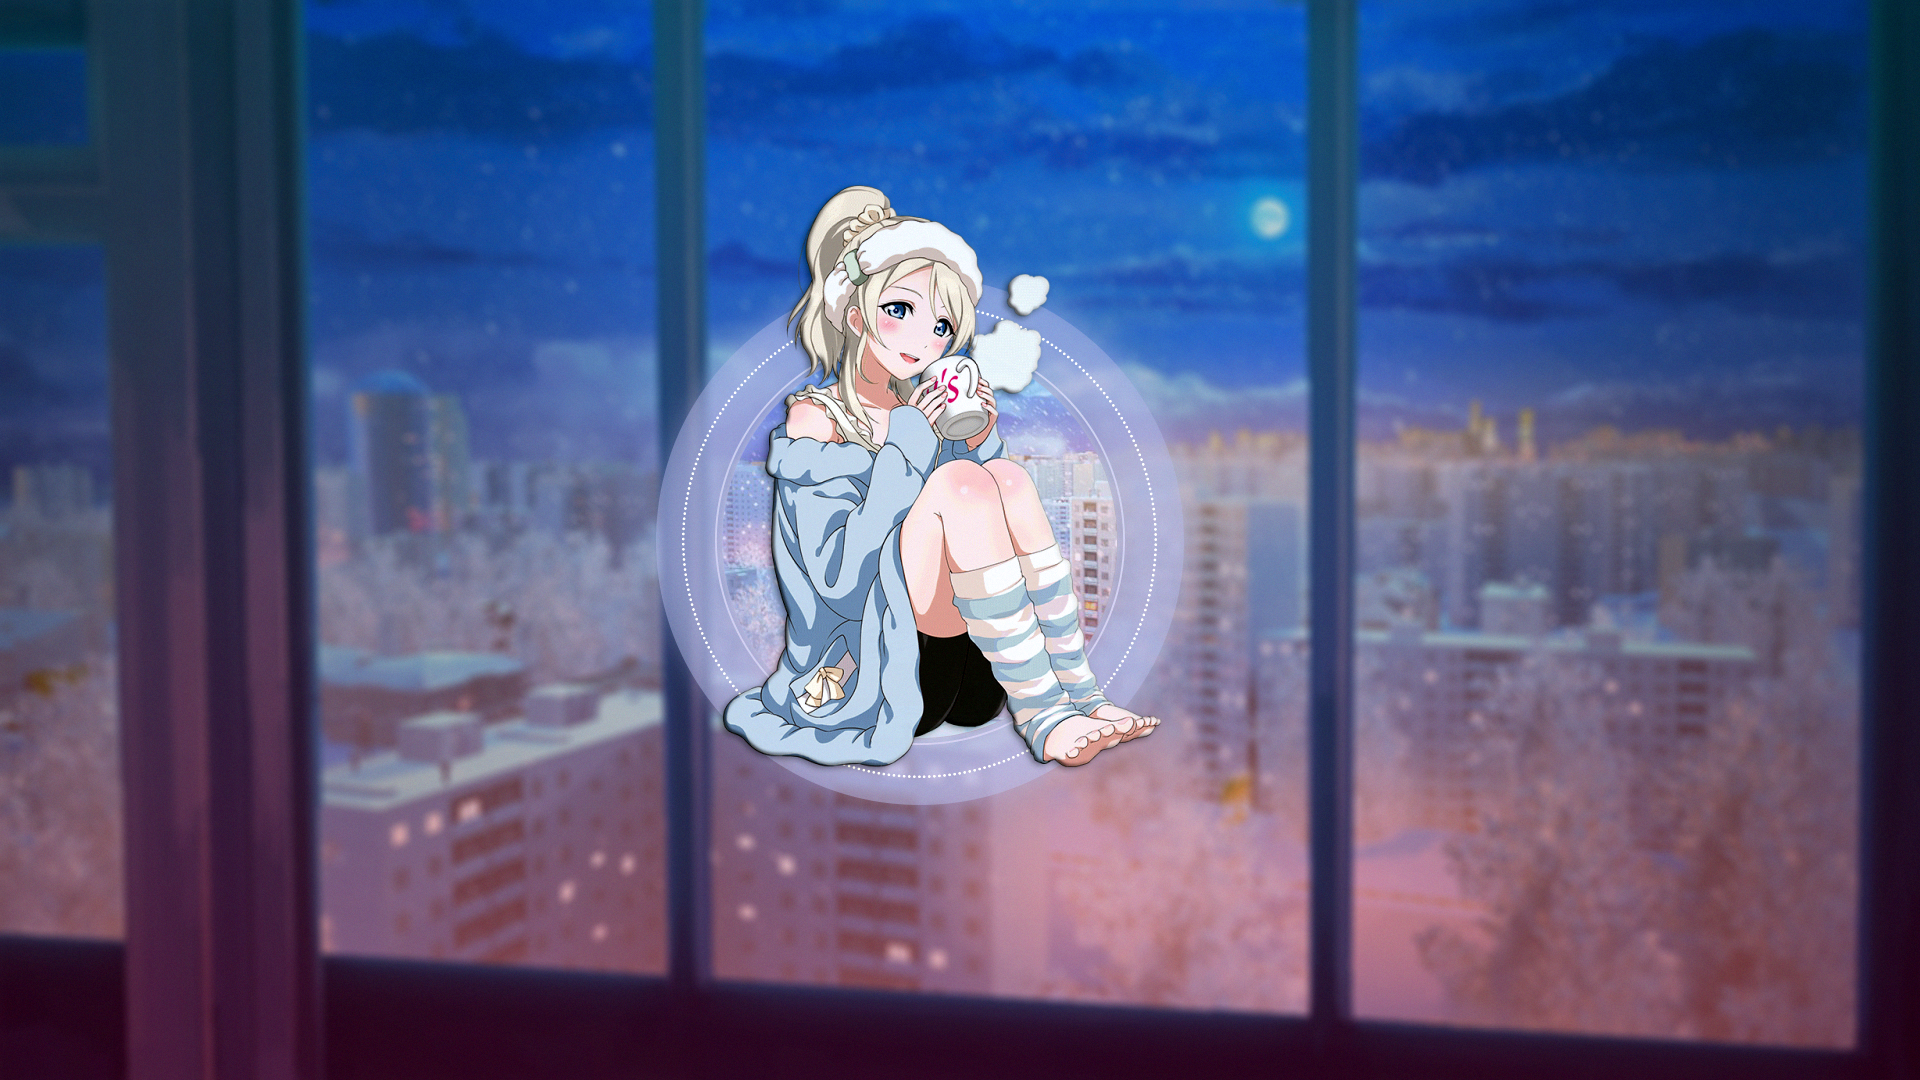 Anime Anime Girls Picture In Picture Sweater Coffee Night 2D Edit Blonde Blue Eyes Winter Eli Ayase  1920x1080